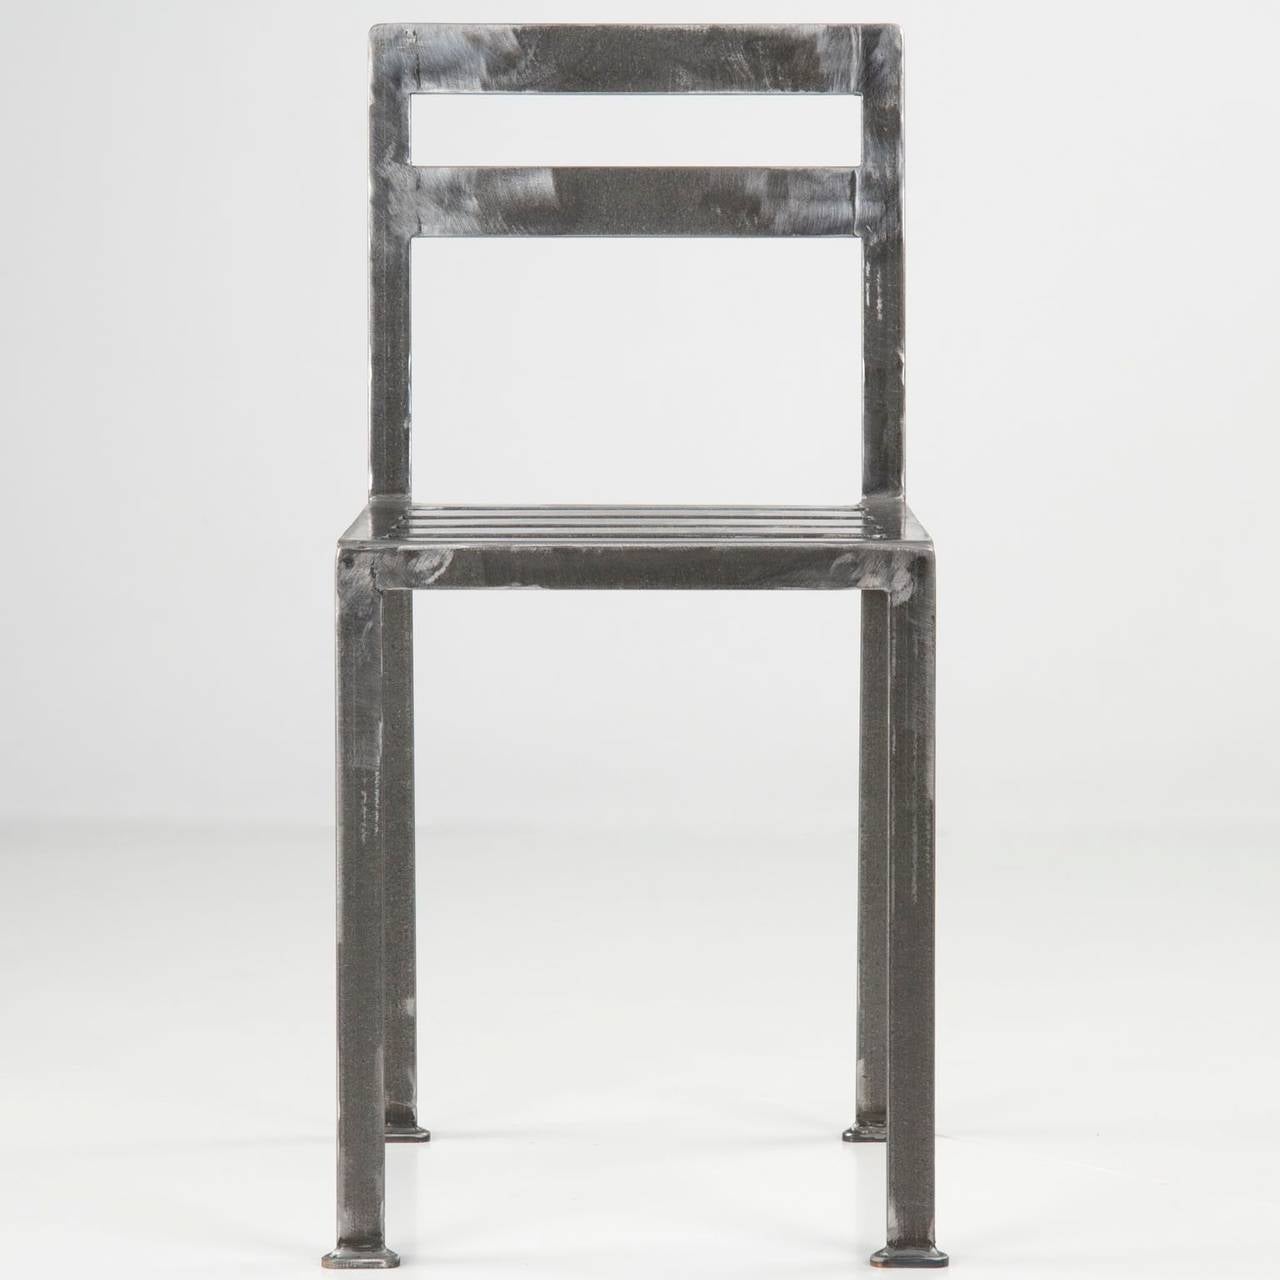 FRENCH INDUSTRIAL STYLE WELDED AND TUMBLED STEEL SIDE CHAIR

Item #  1502AKW-n 

Several years back we acquired a set of French Industrial welded steel chairs that I found absolutely inspiring - the lines were angular and perfect, the form free